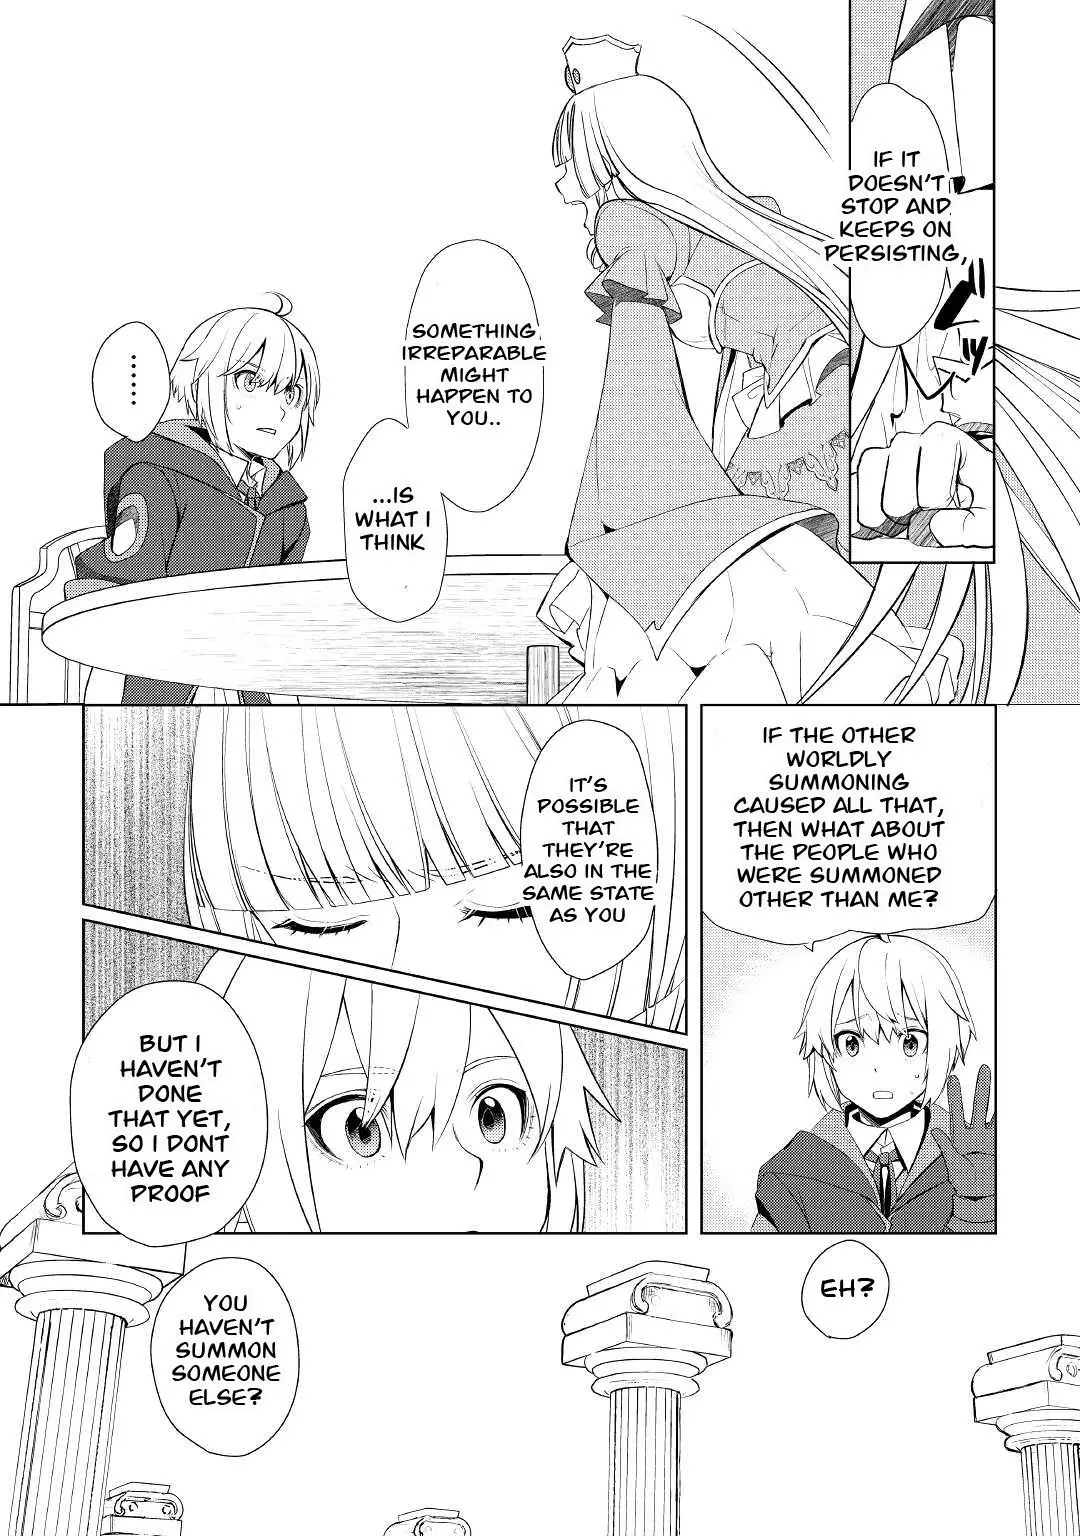 Someday Will I Be The Greatest Alchemist? - 30 page 10-f0d87f86